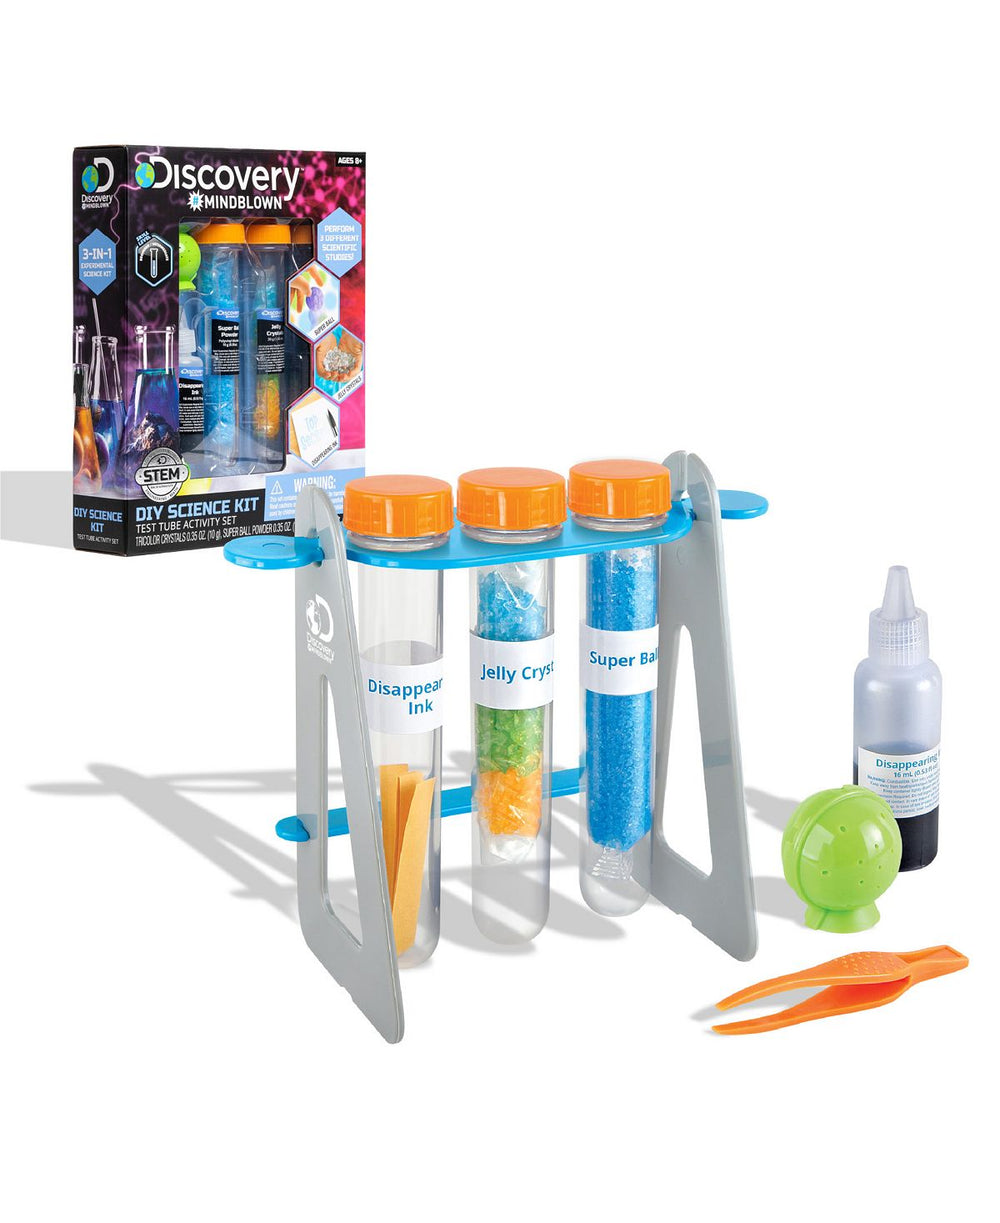 Discovery #MINDBLOWN 14-Piece Test Tube Science Kit with 3 Experiments